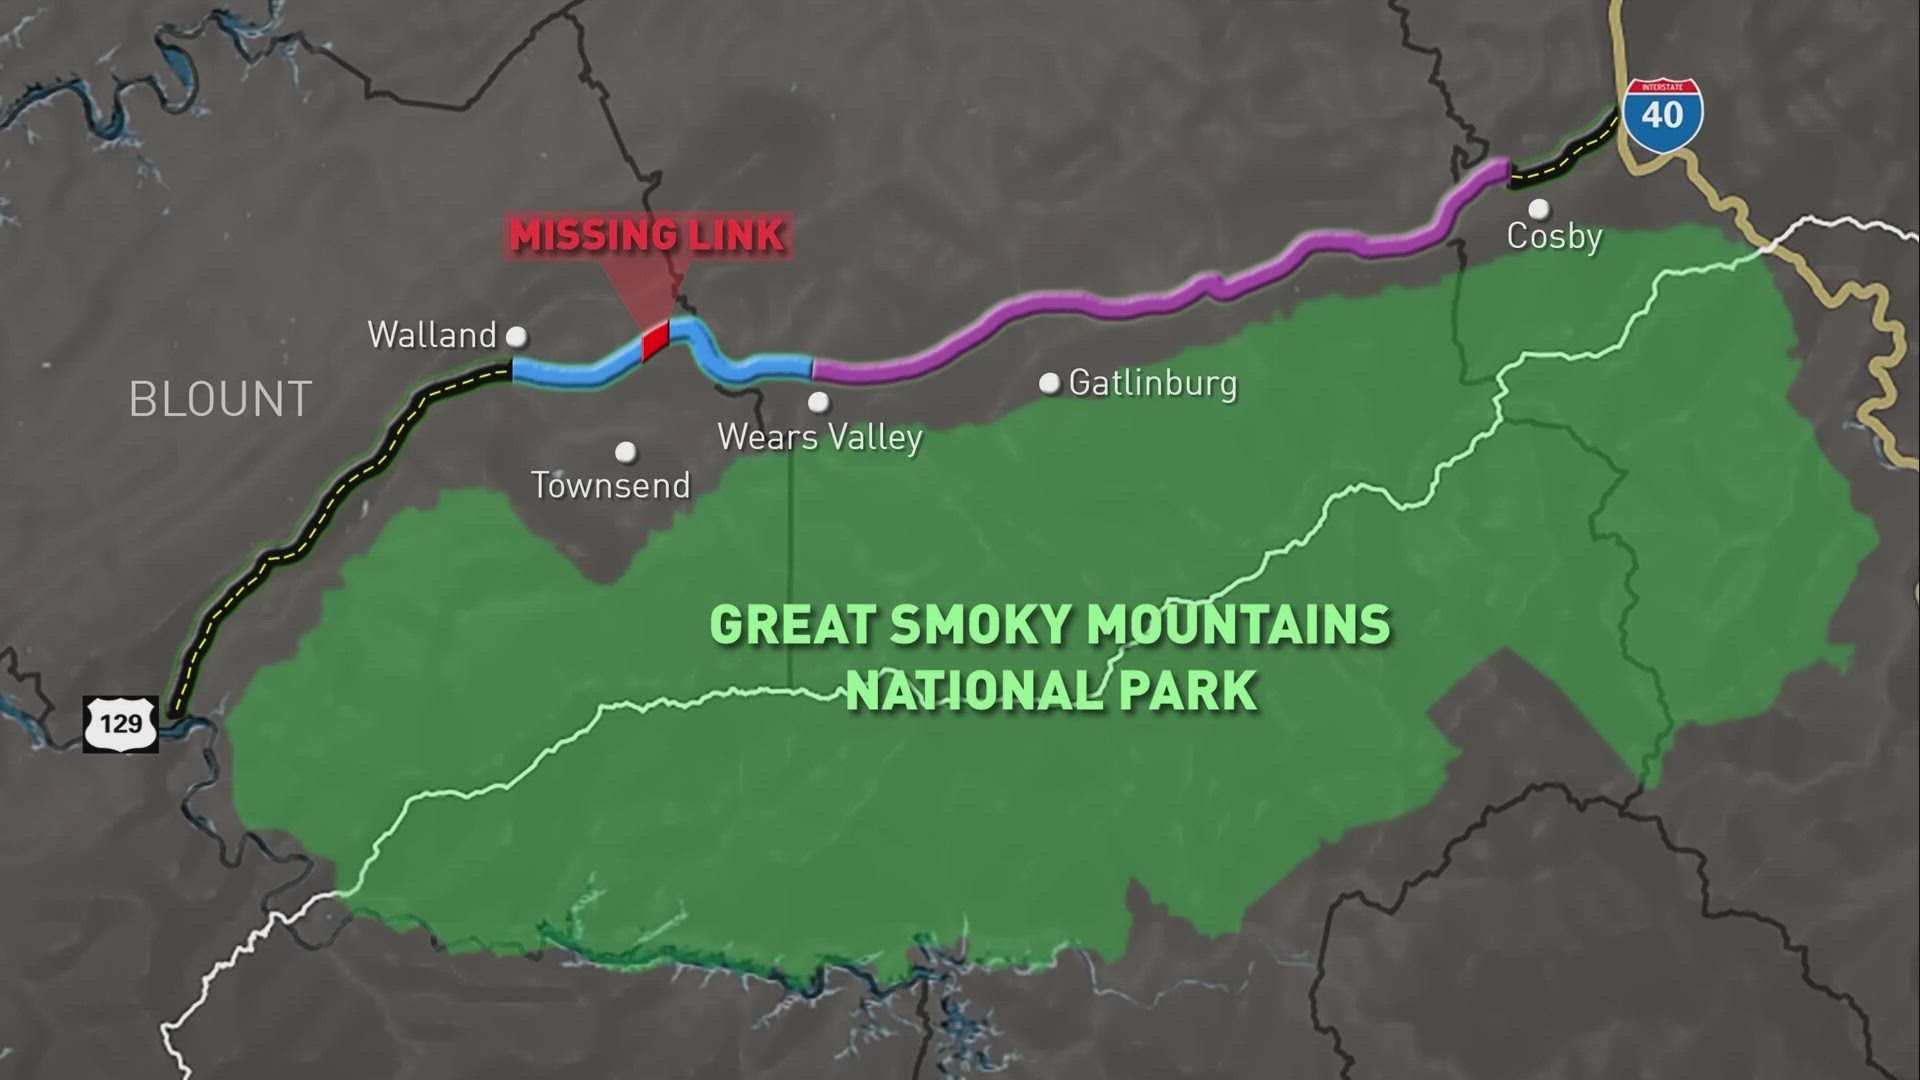 The National Park Service plans to extend the Foothills Parkway to connect wears valley to Gatlinburg.